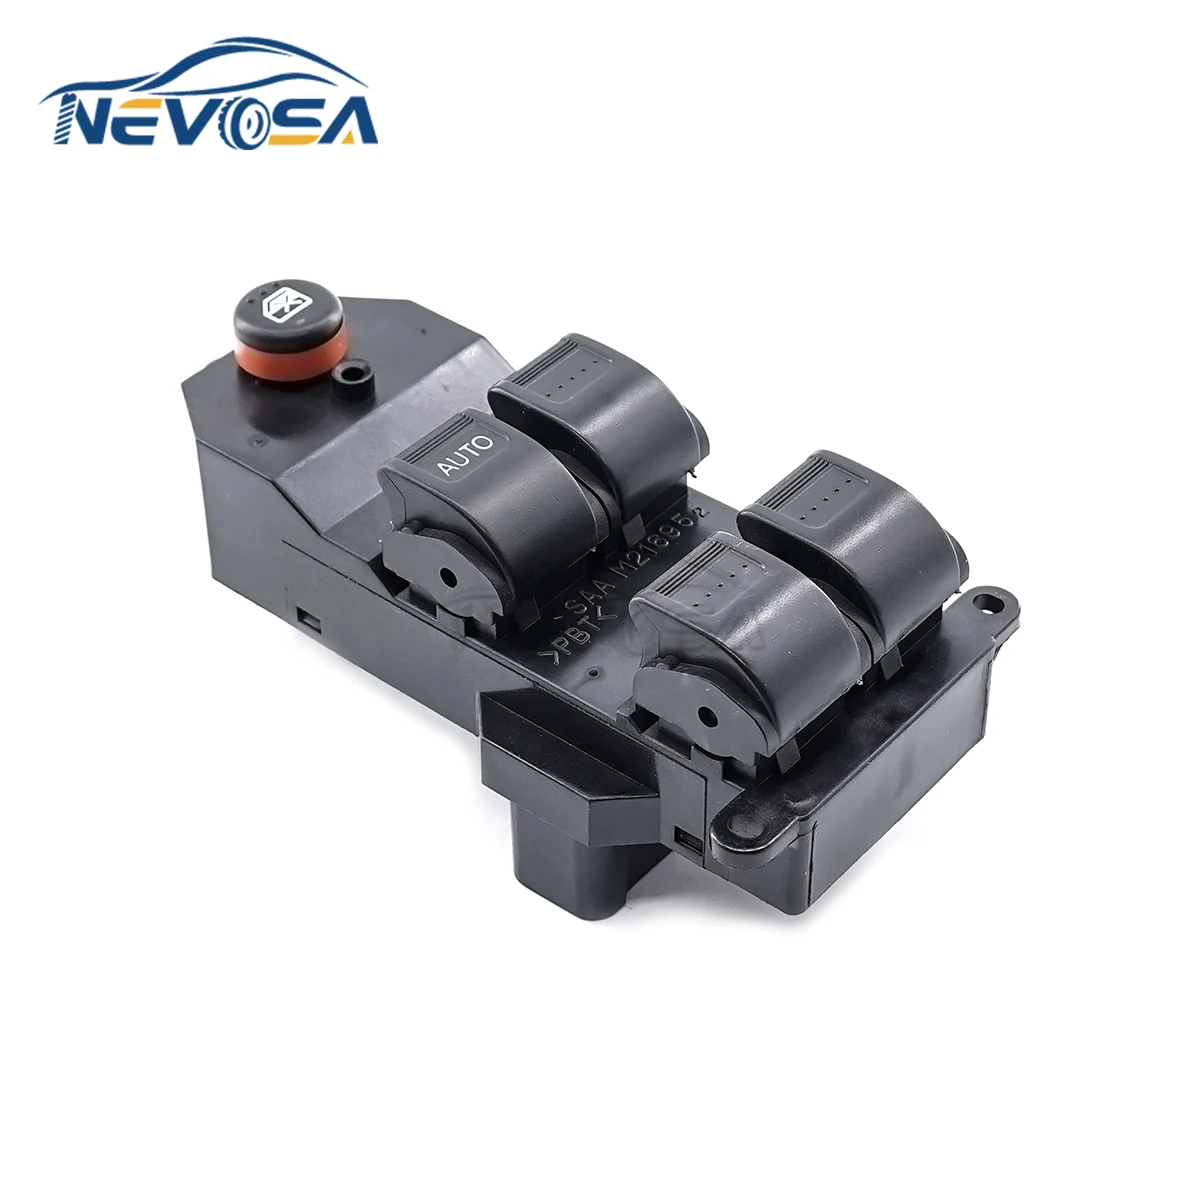 

Nevosa 35760-S9A-G042A Front Left Electric Power Window Control Switch For Honda CRV CR-V 2002-2006 Civic 2001-05 35760S9AG042A